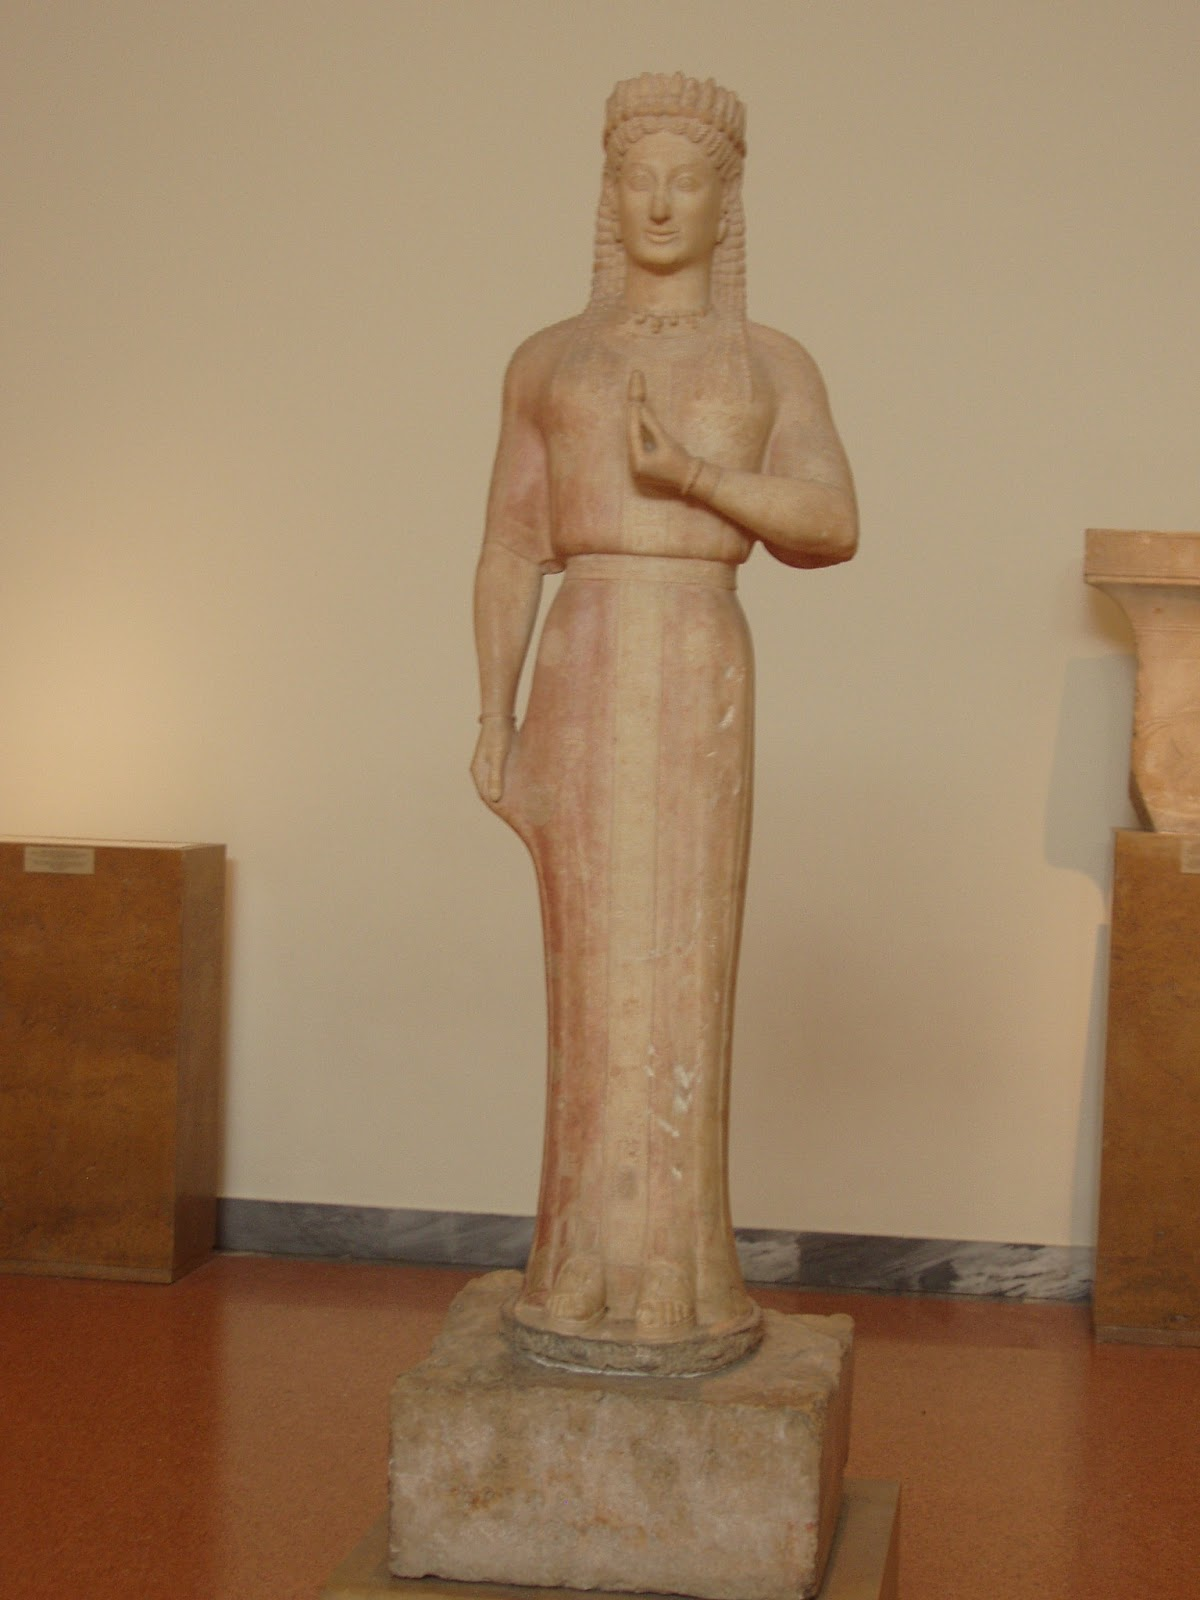 PHOTO 2. The statue (and the statue base) of Phrasikleia.